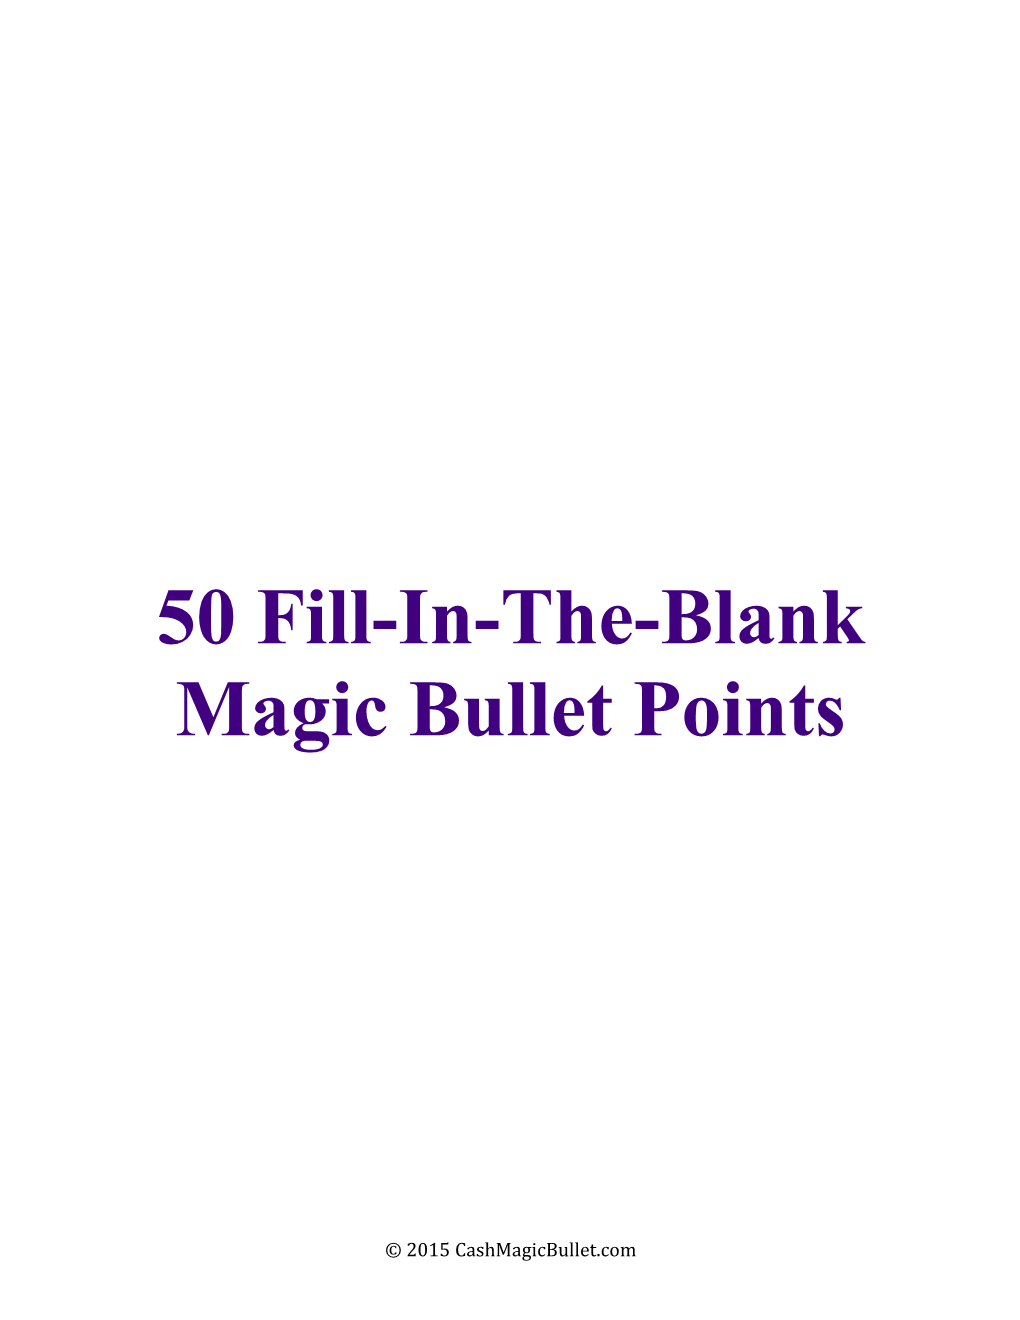 50 Fill-In-The-Blank Magic Bullet Points